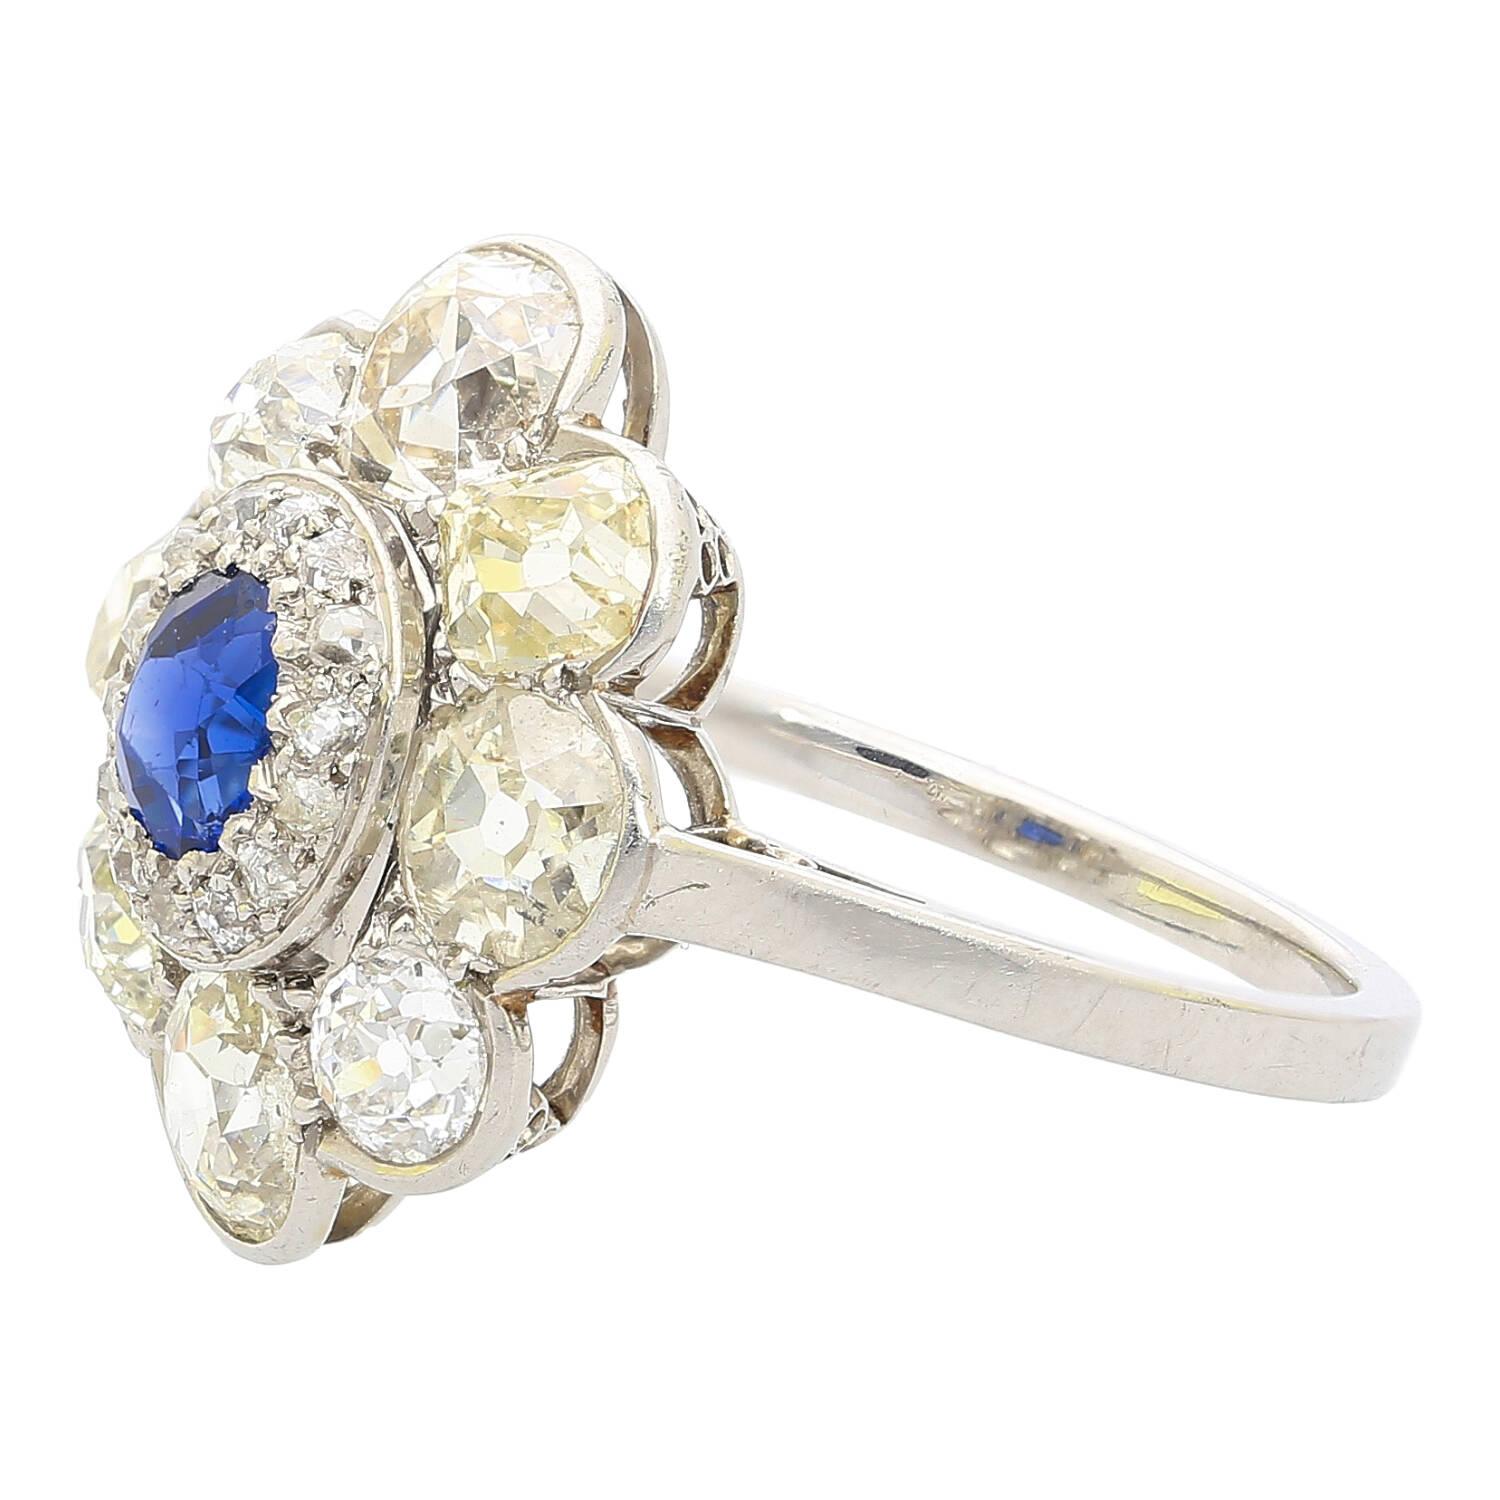 Introducing this vintage retro era oval cut Blue Sapphire and old euro cut diamond halo ring, set in platinum. This historic ring features an AGL certified 0.50 carat Blue Sapphire of Burmese origin and no heat treatment. Adorned with over 4 carats